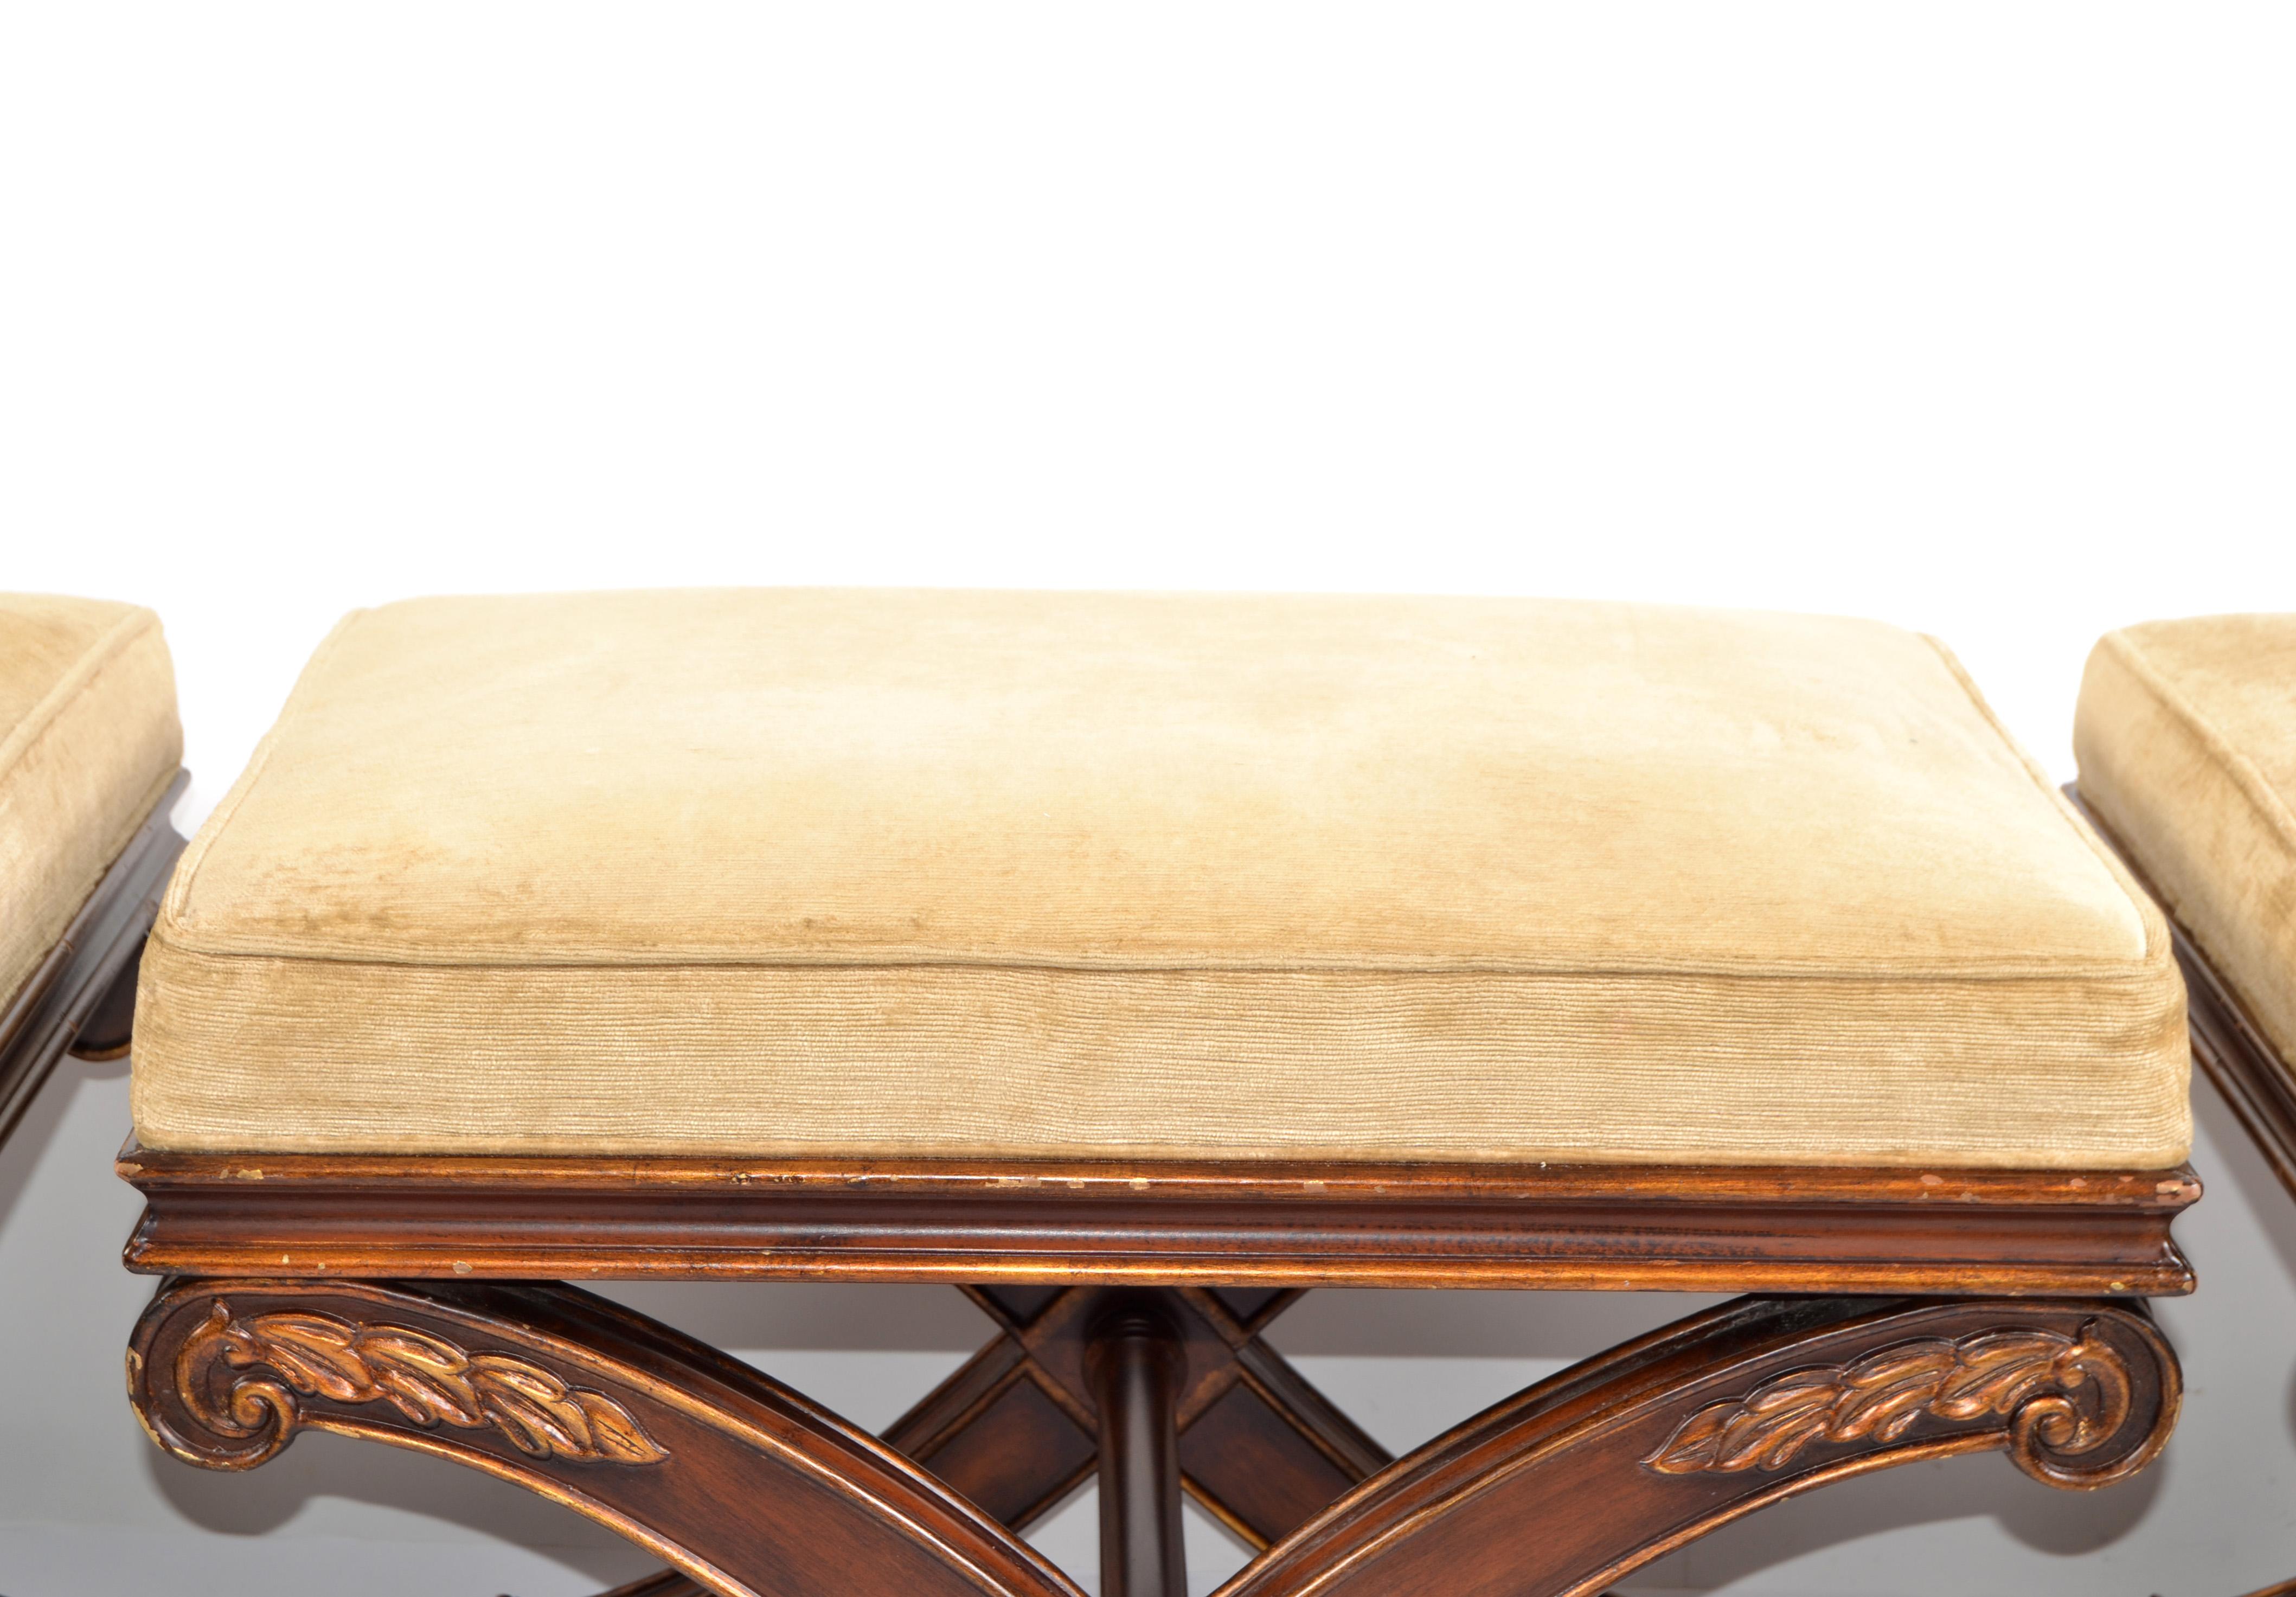 Contemporary 1 of 3 Neoclassical French Benches Stools Ottoman Regency X Based America For Sale